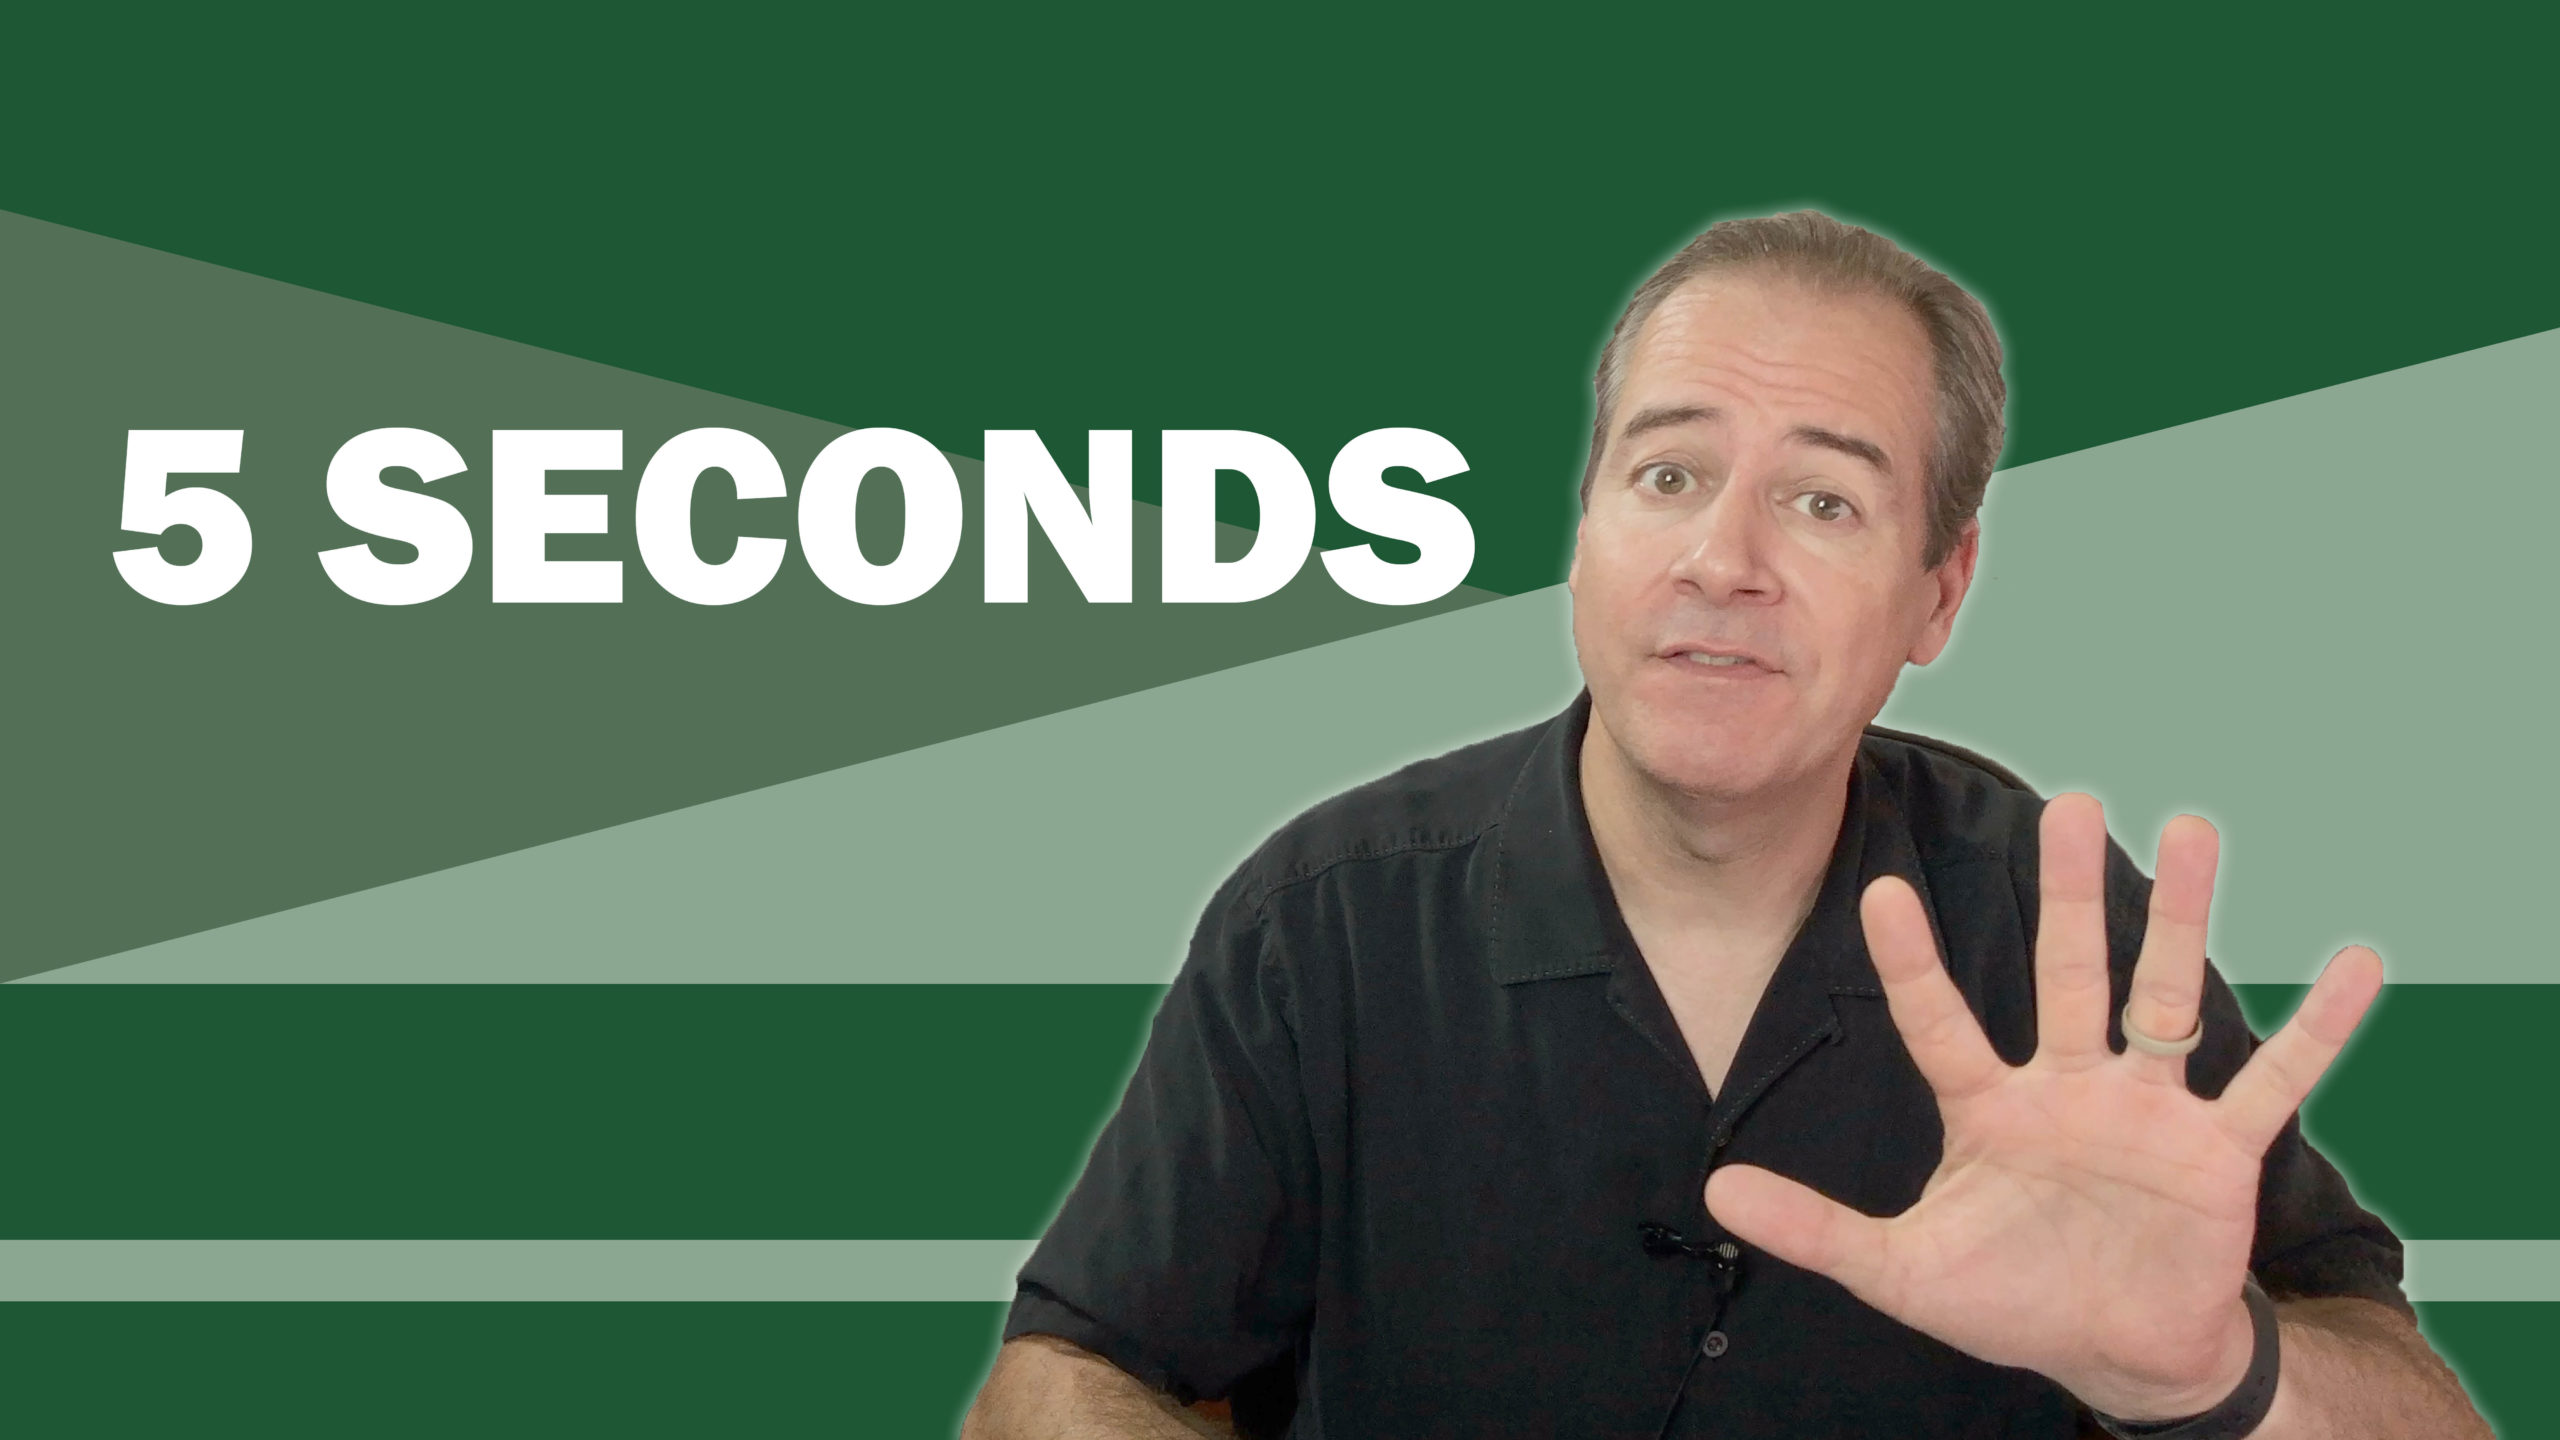 The 5 Second Rule – Solve your problems, meet your goals, and stop procrastinating